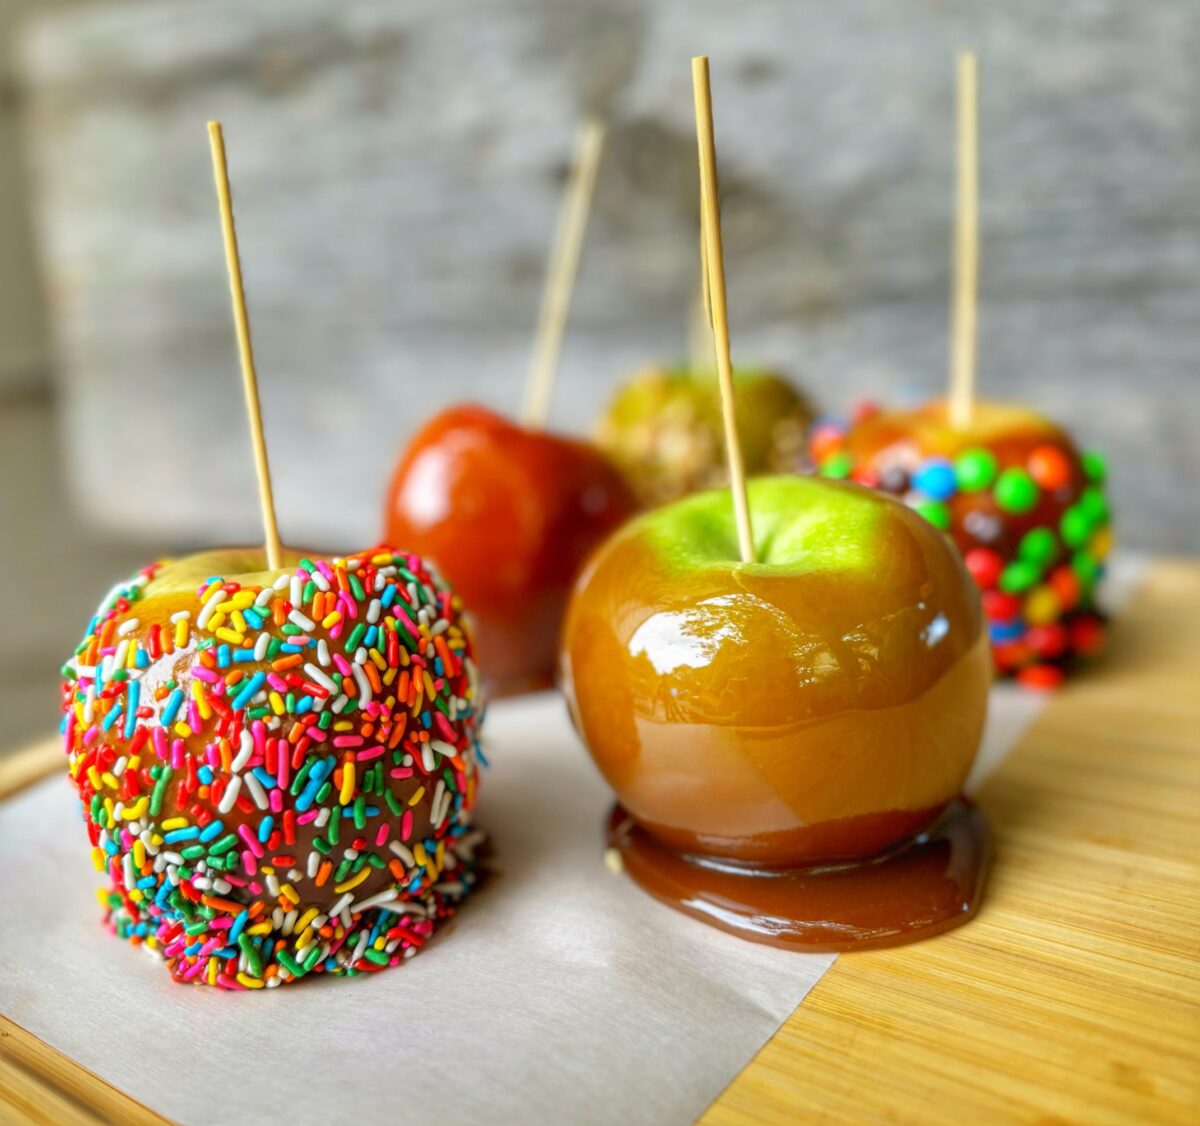 Four shiny smoked caramel apples on a cutting board.